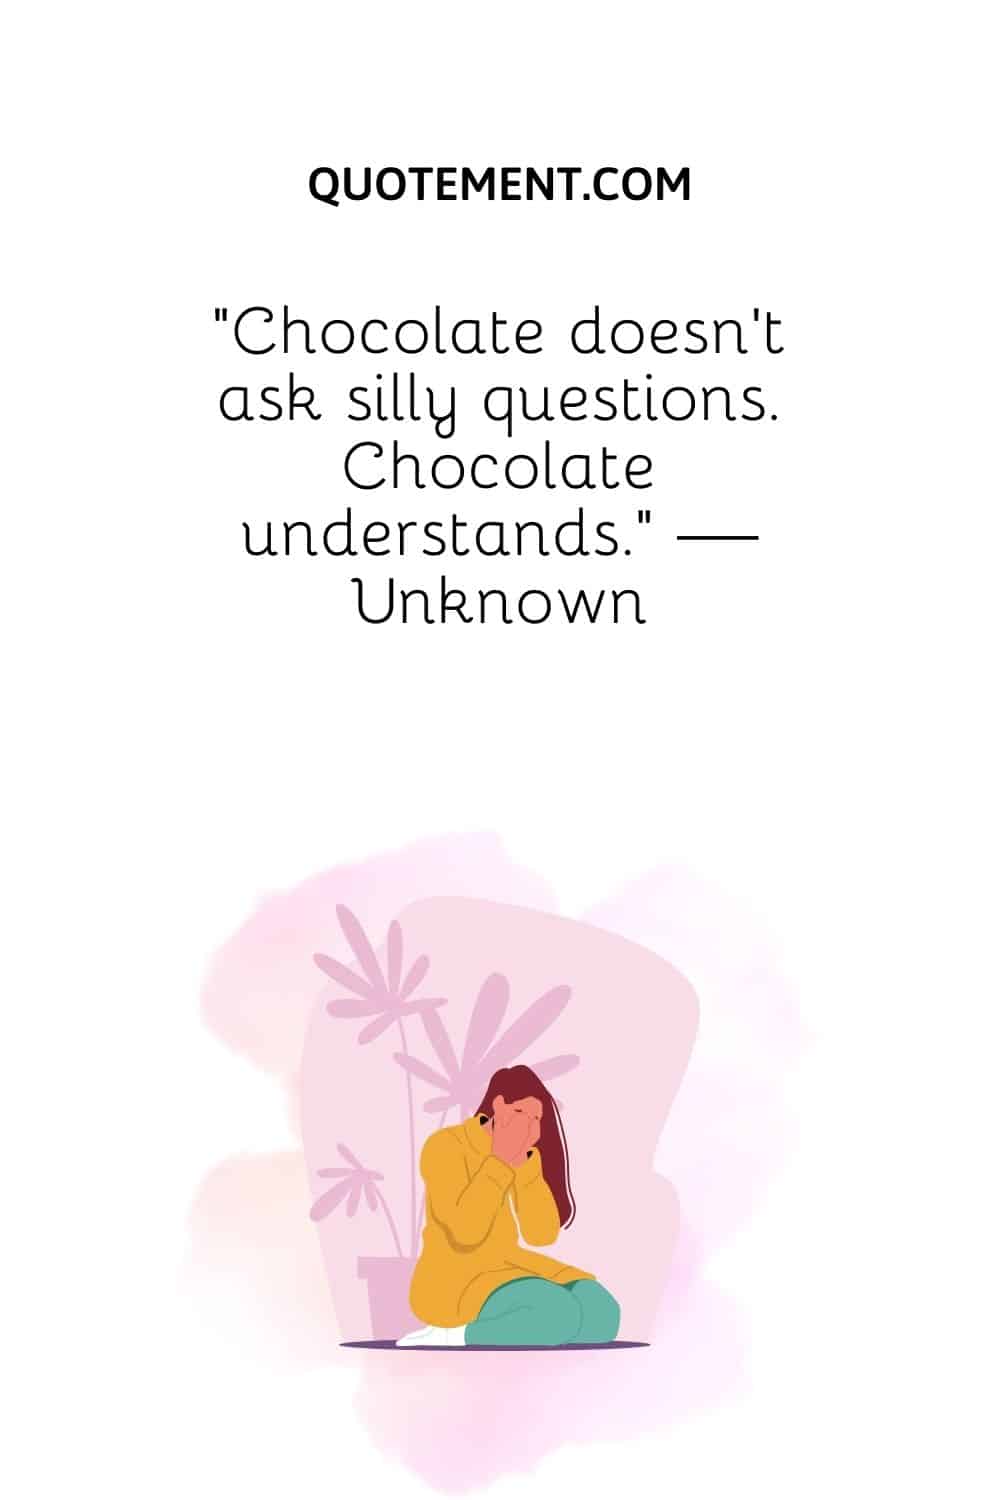 Chocolate doesn’t ask silly questions. Chocolate understands